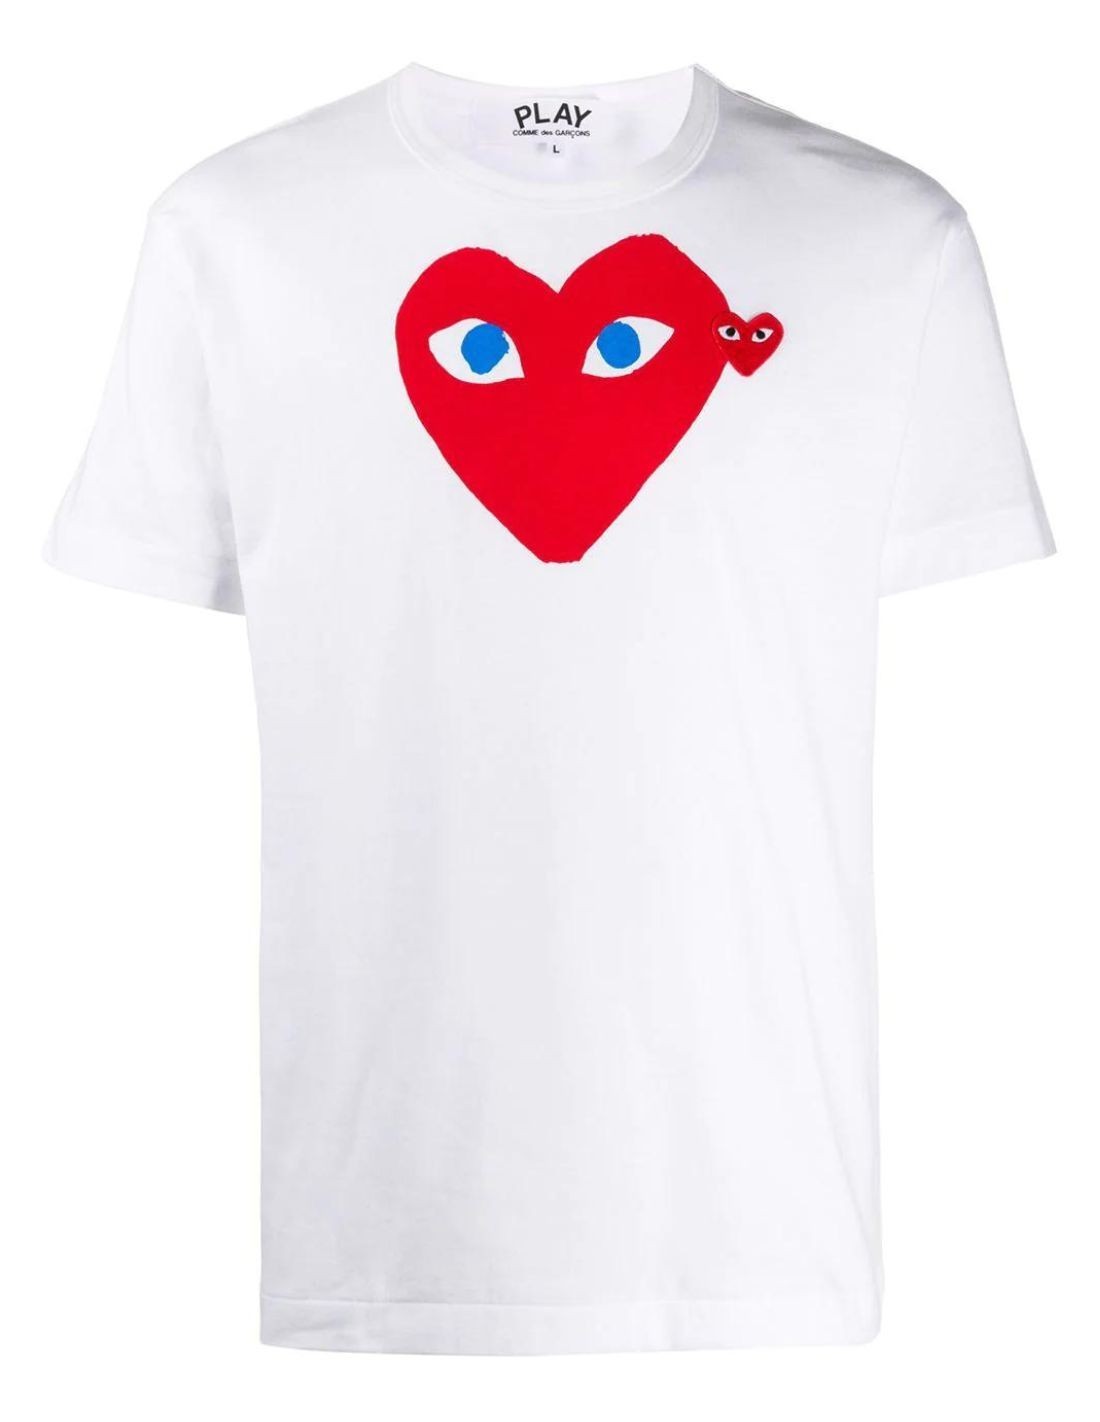 Large red heart with blue eyes tee-shirt COMME DES GARÇONS PLAY unisex.